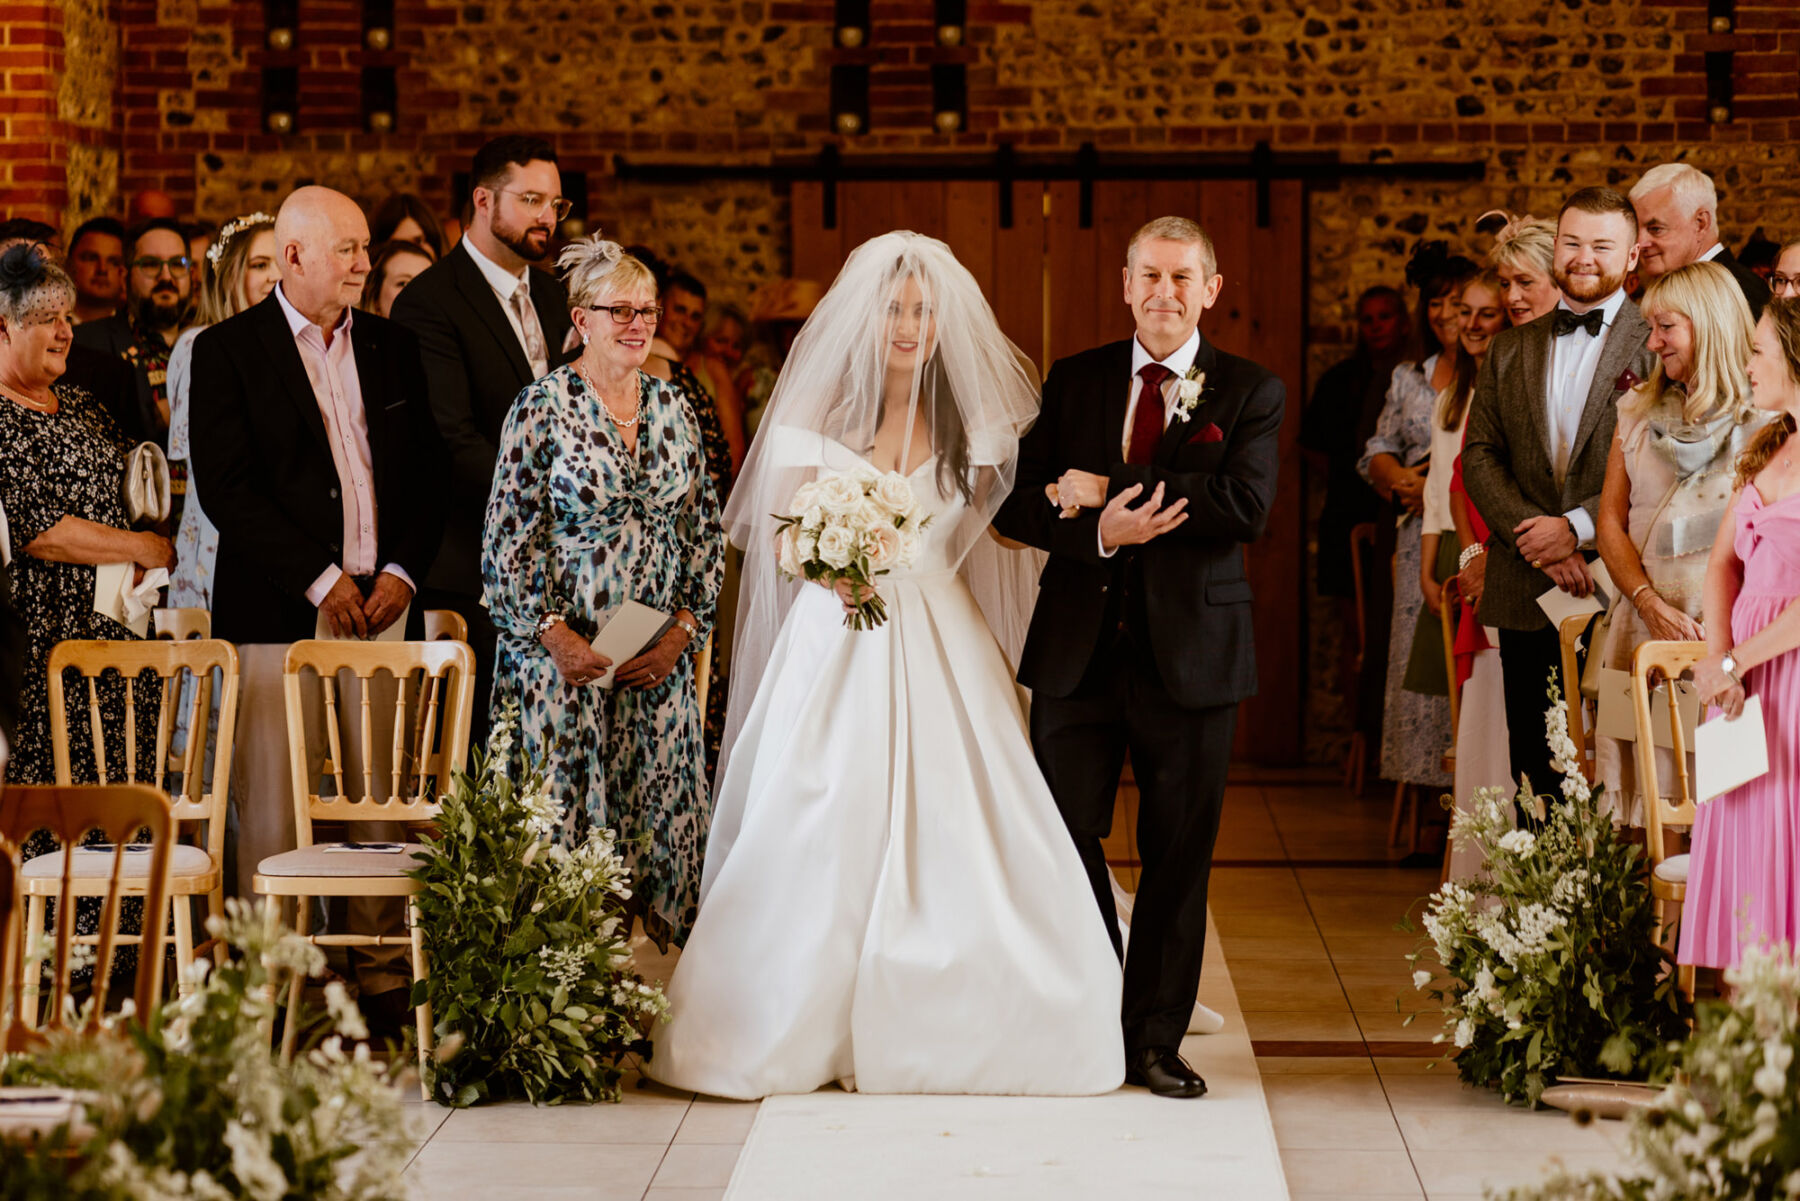 Bride in a Suzanne Neville wedding dress and veil from Miss Bush, bridal boutique, Surrey, UK.